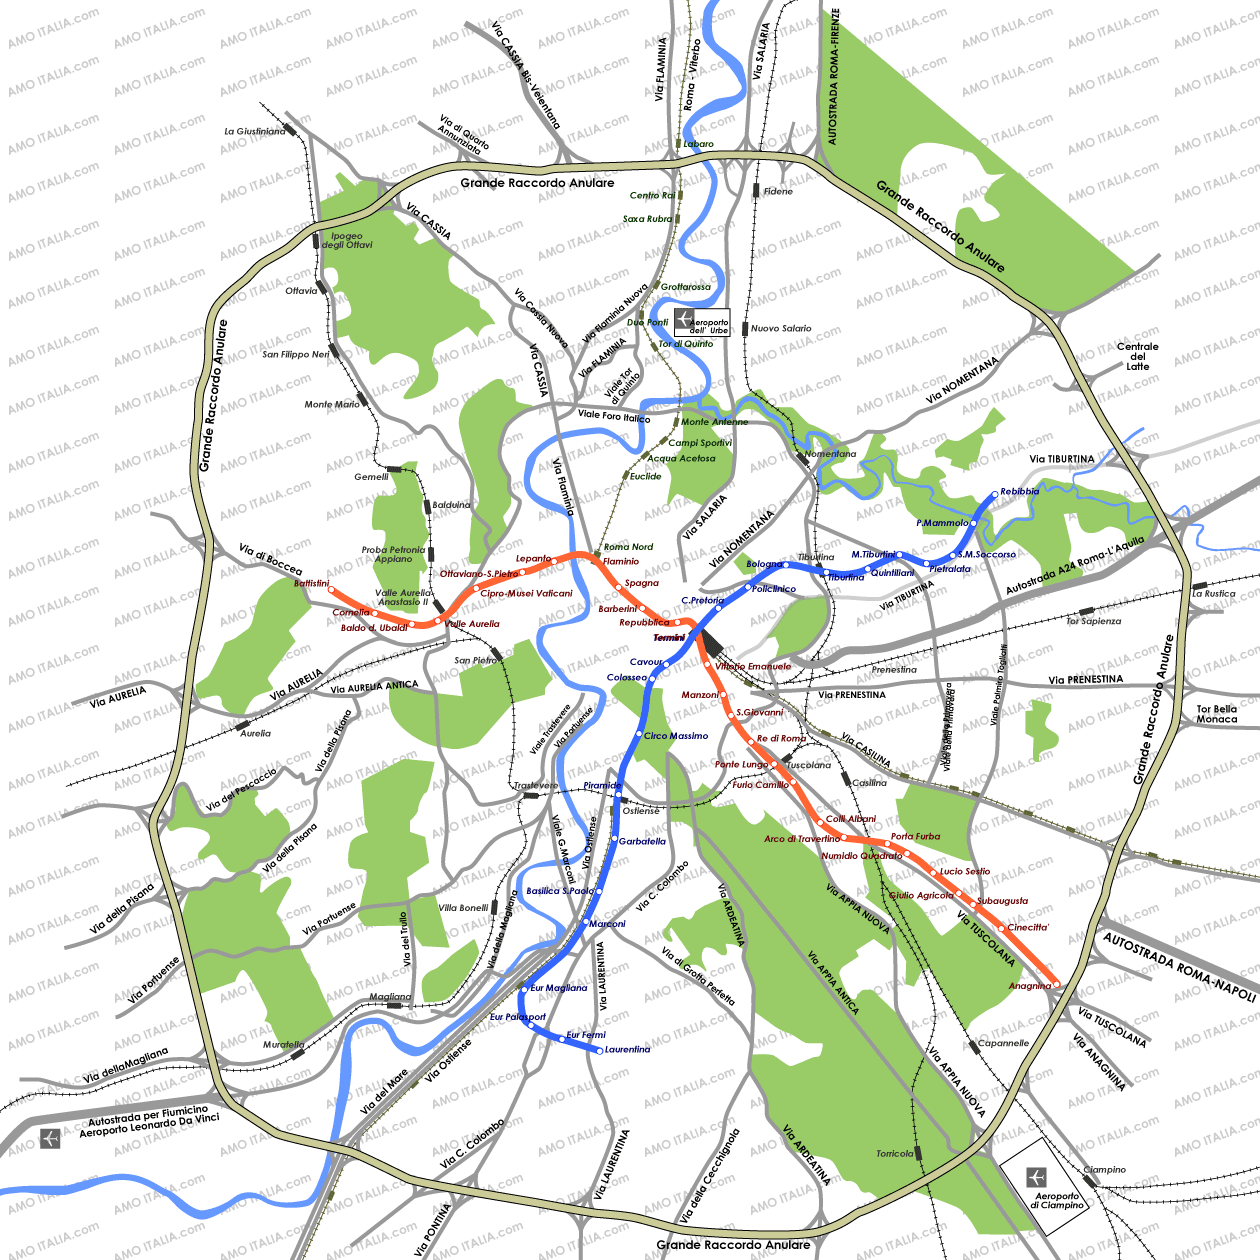 Map of highway and metro in Rome